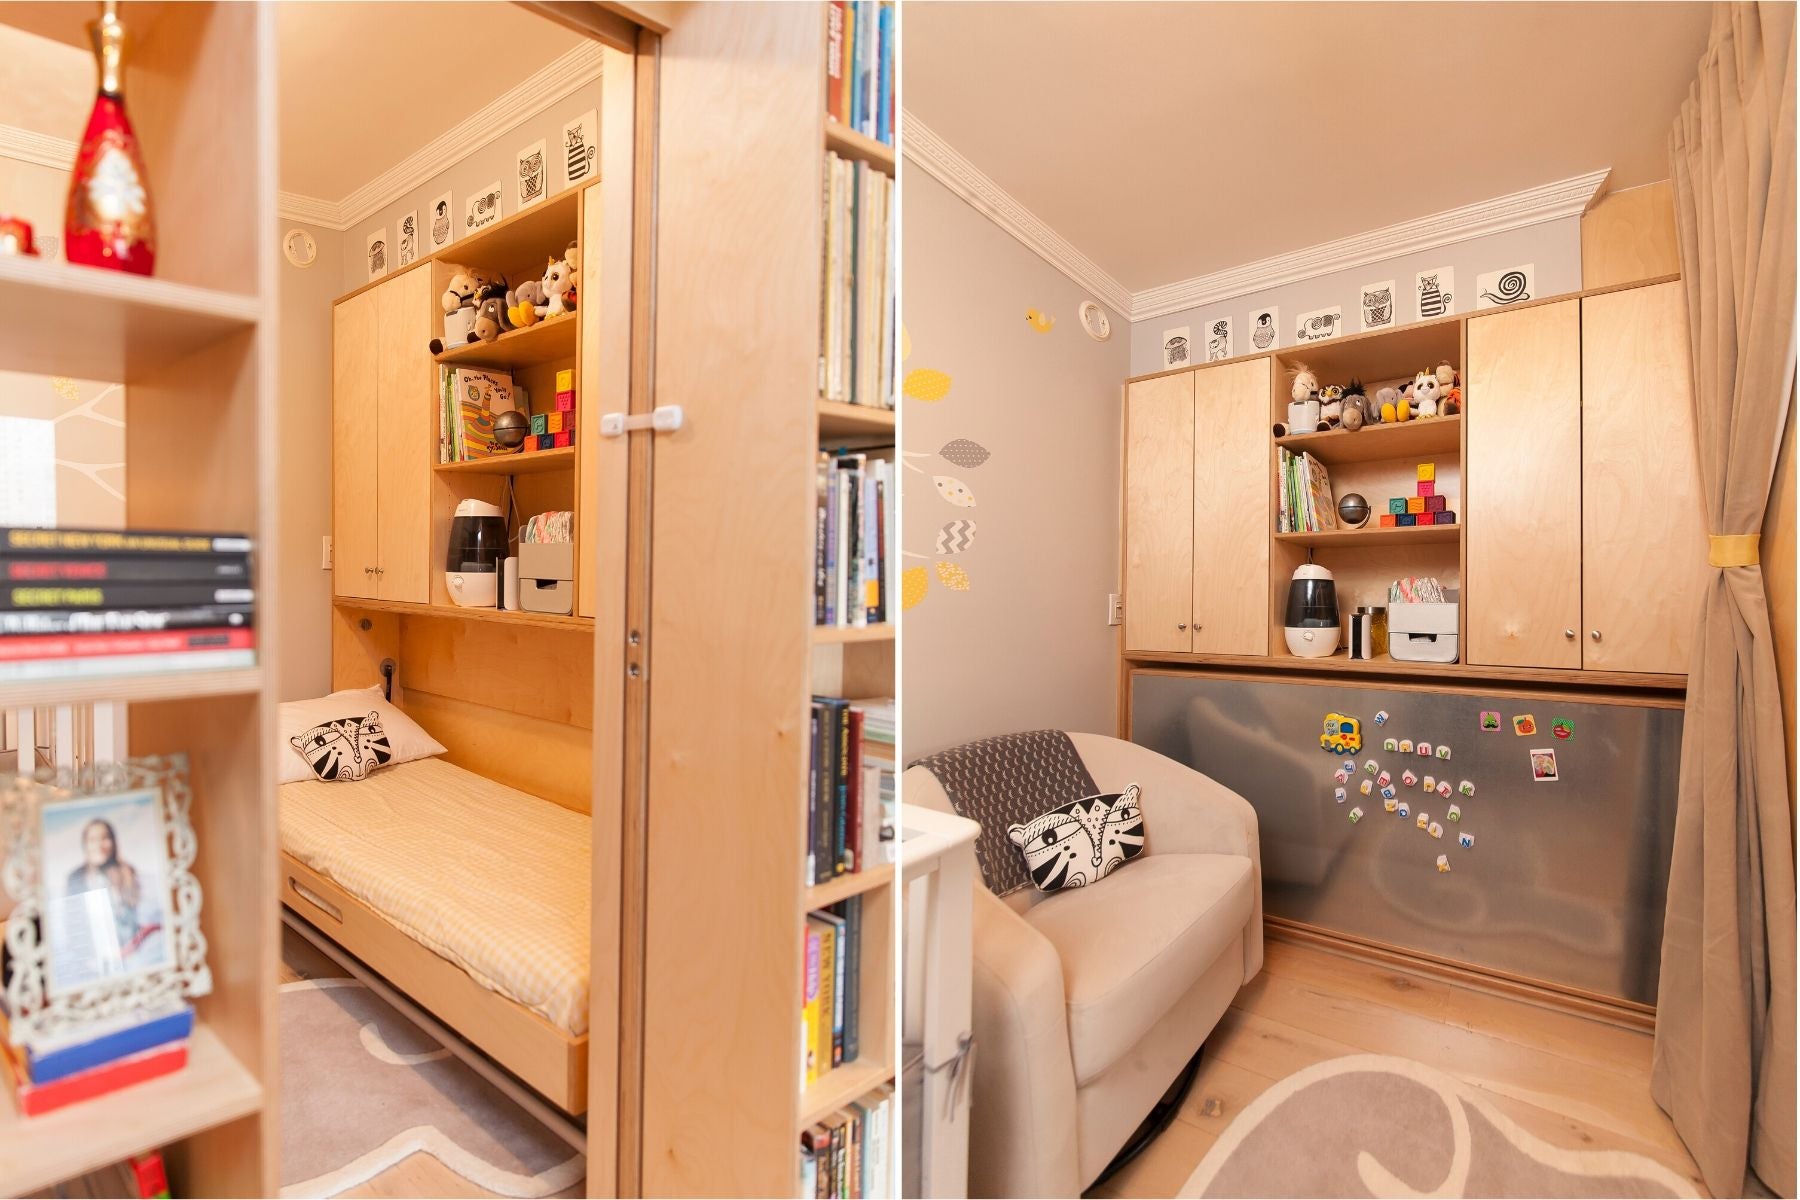 Cozy room interior with wooden Murphy bed, shelves, and seating area